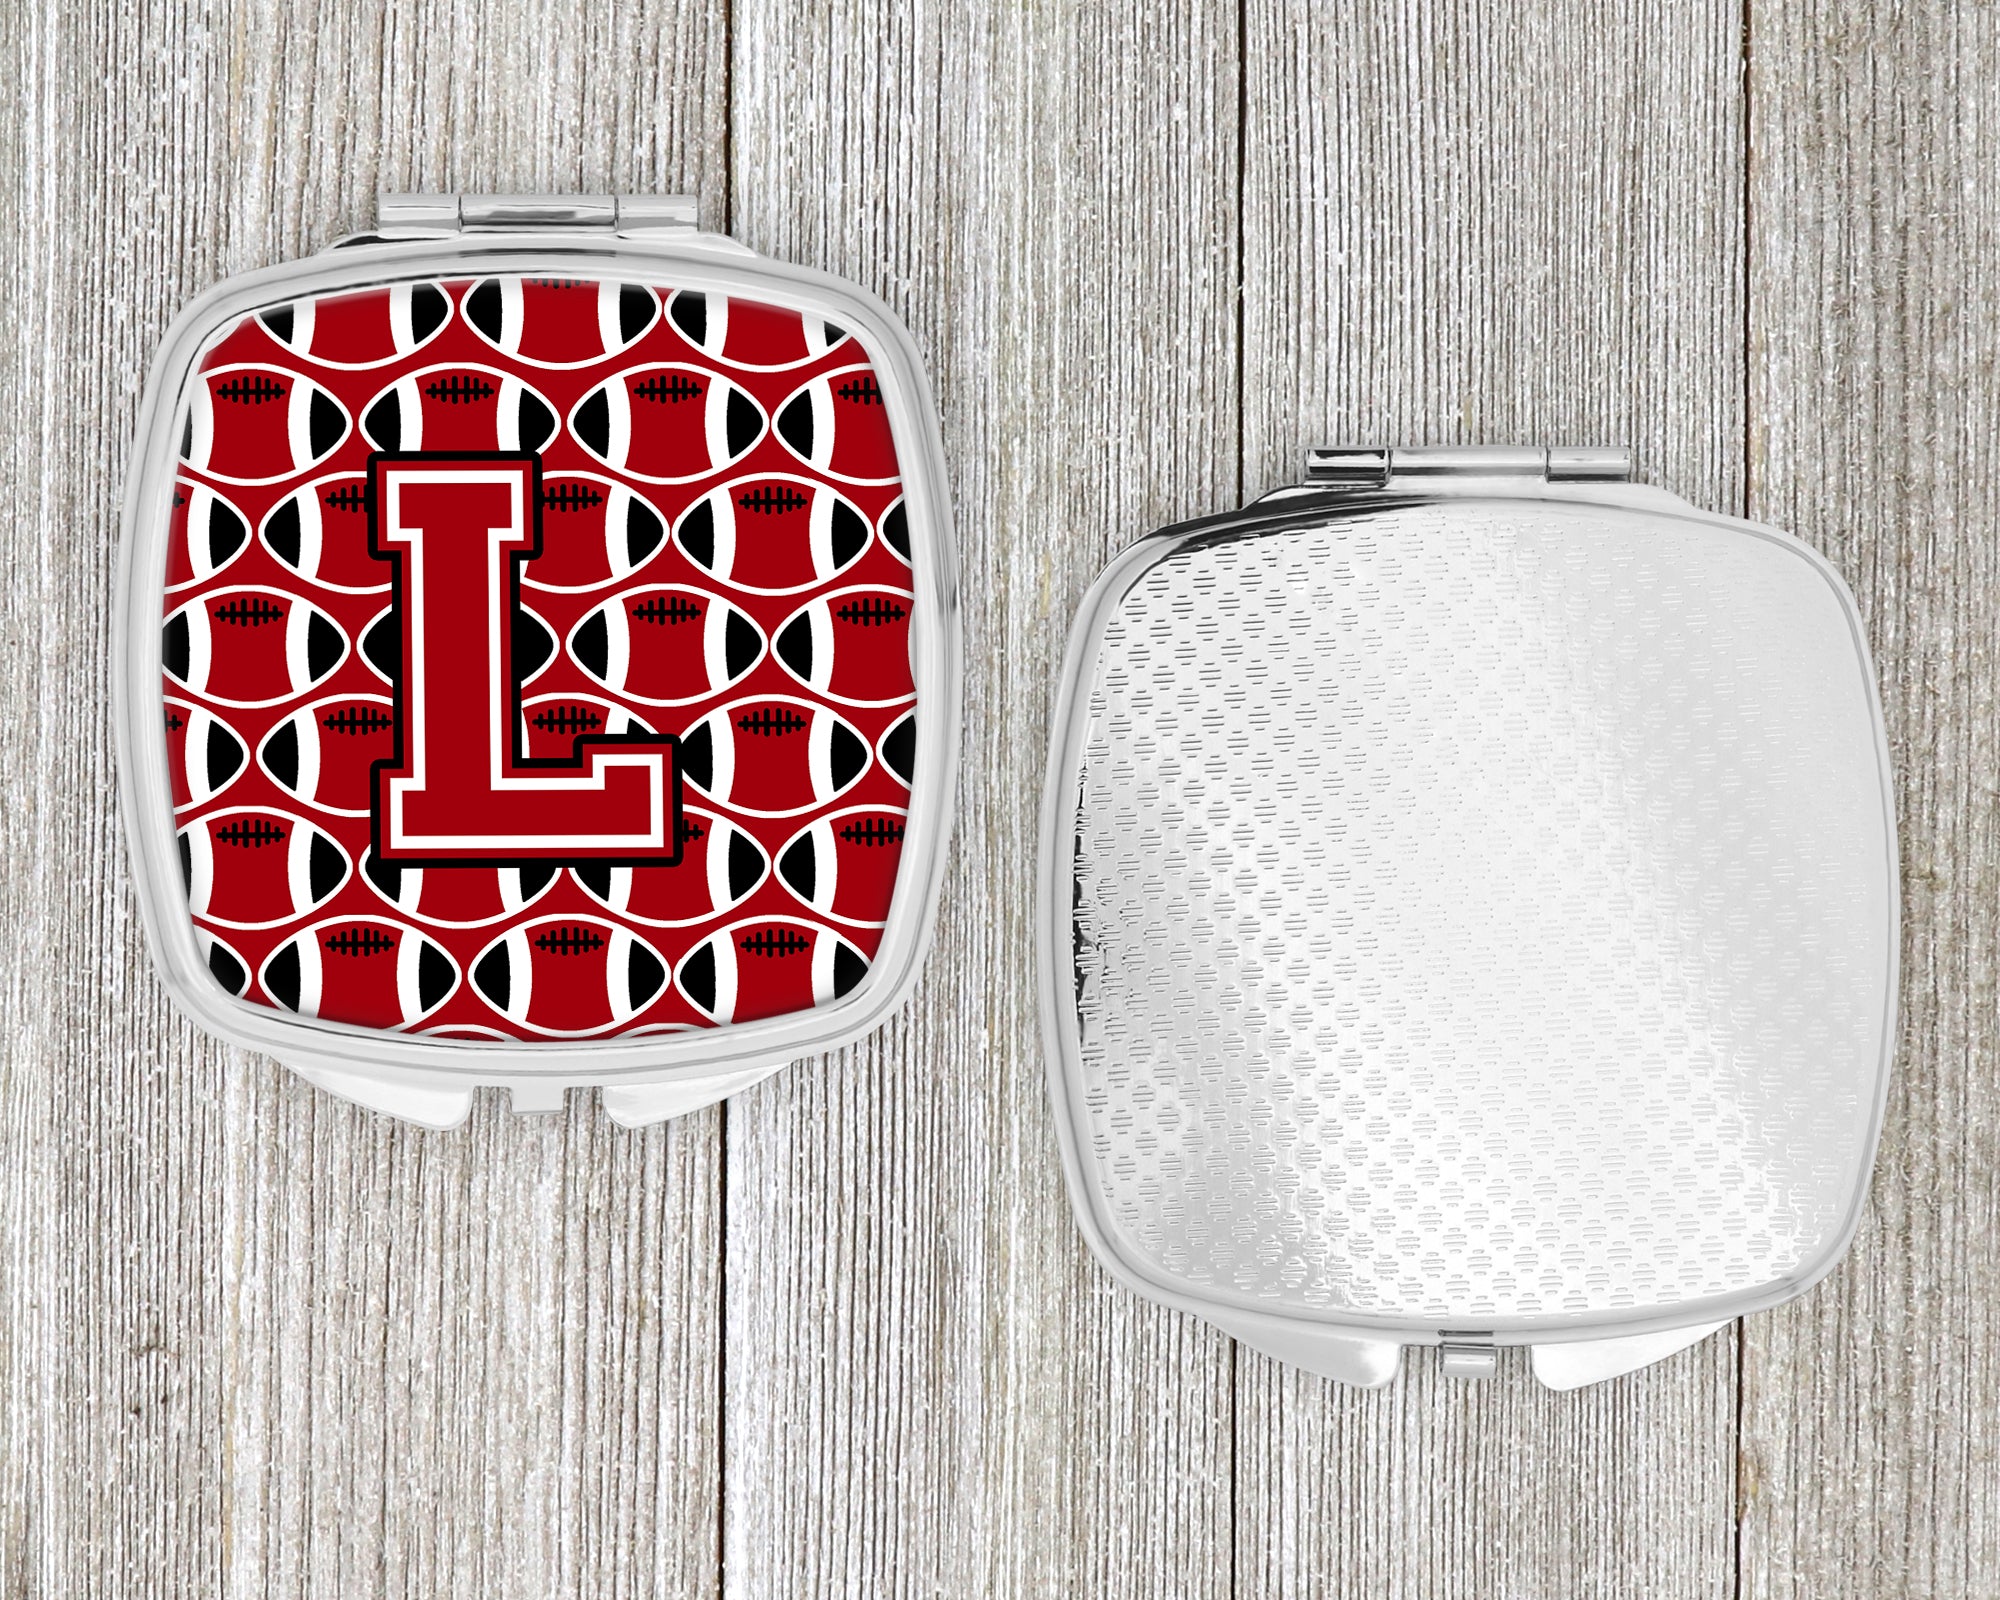 Letter L Football Red, Black and White Compact Mirror CJ1073-LSCM  the-store.com.